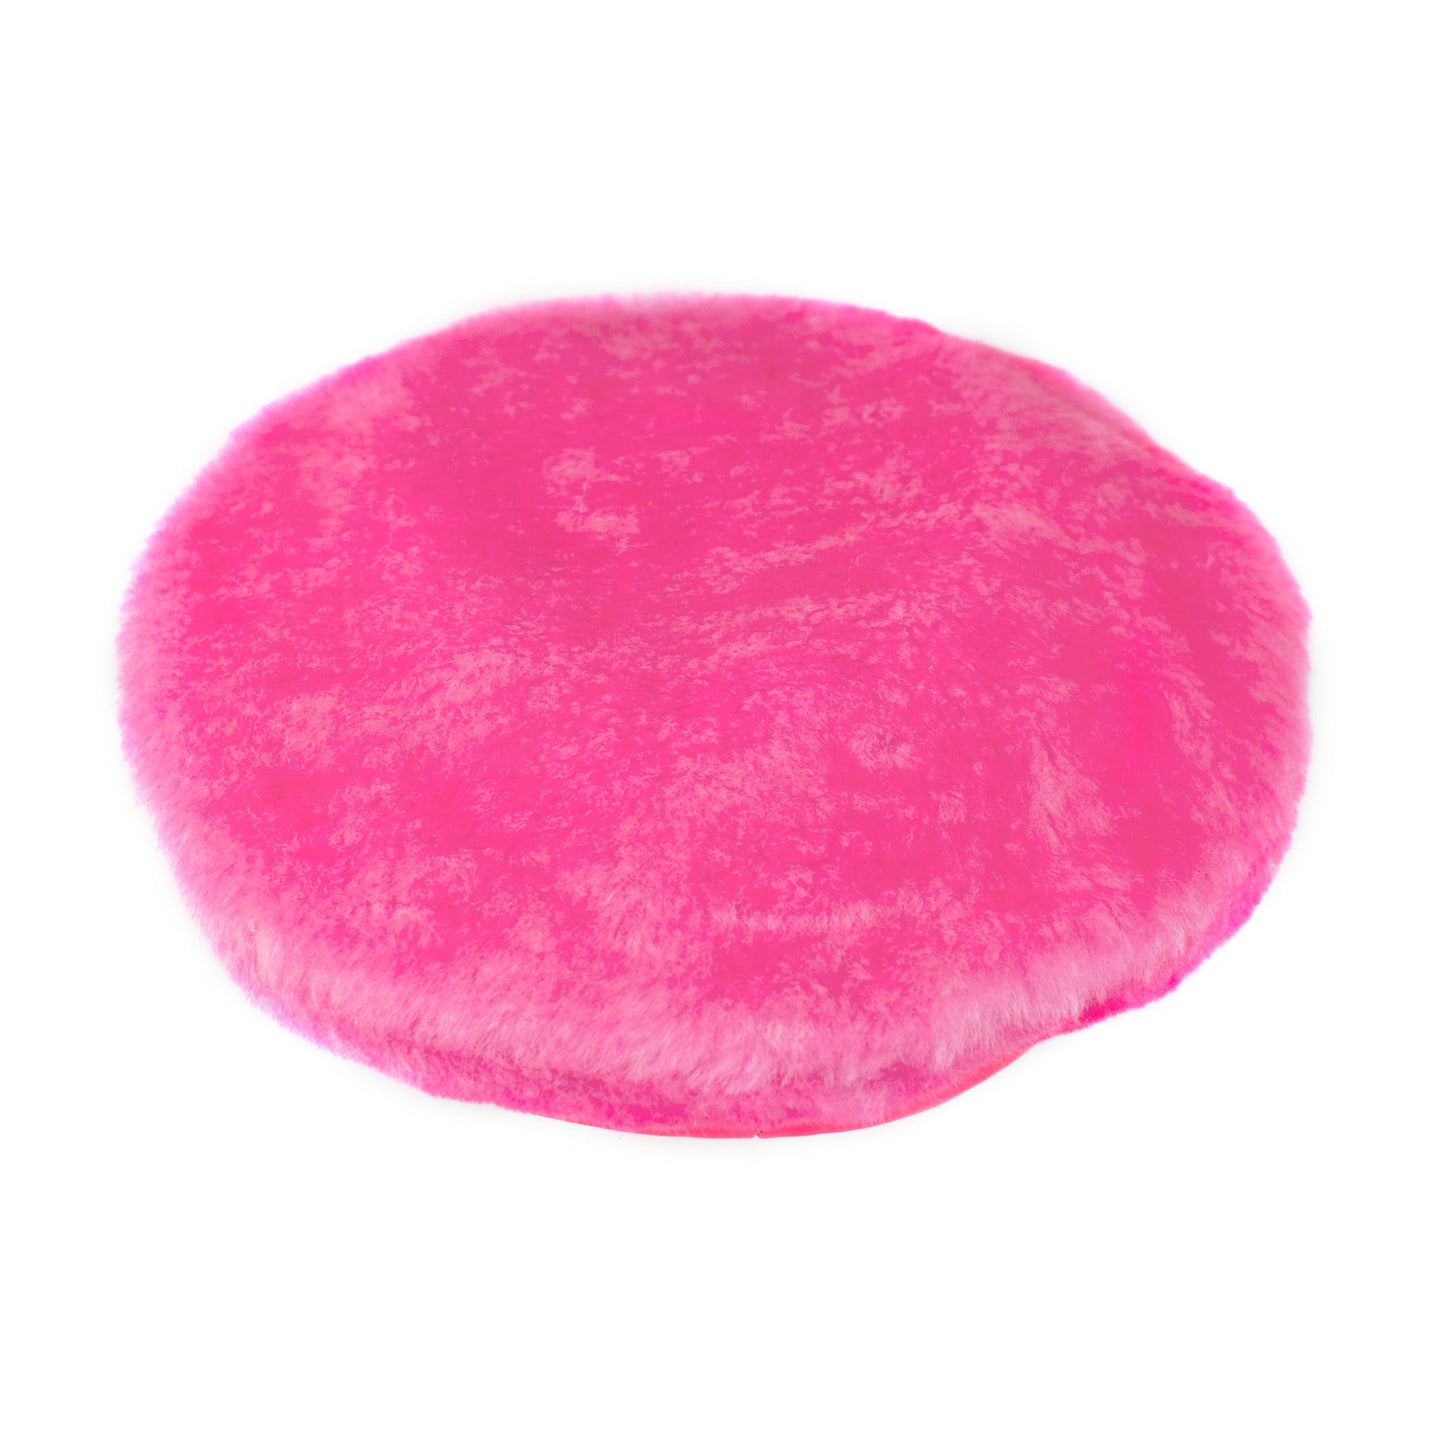 "PINK" French beret hat